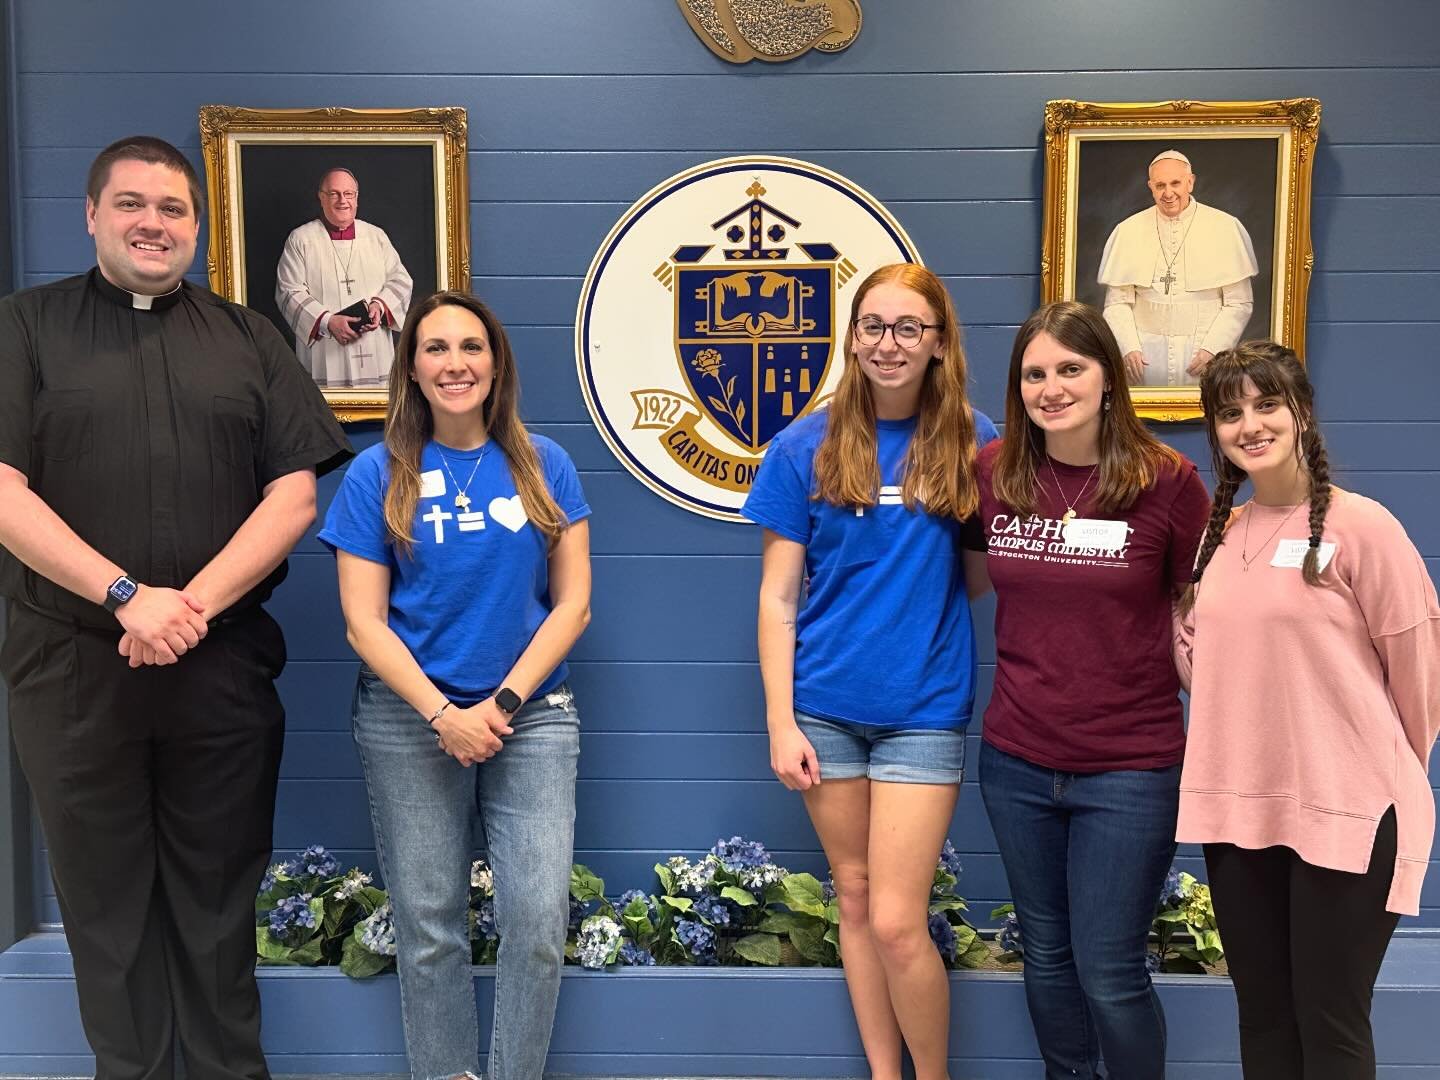 Rowan Catholic Campus Ministry &amp; @stocktonnewmanclub spoke today Holy Spirit HS @hshsspartans about campus ministry on college campuses. Thank you to Fr. Nilsen and the teachers who welcomed us into their classrooms to share!

@camdendiocese 
#ne